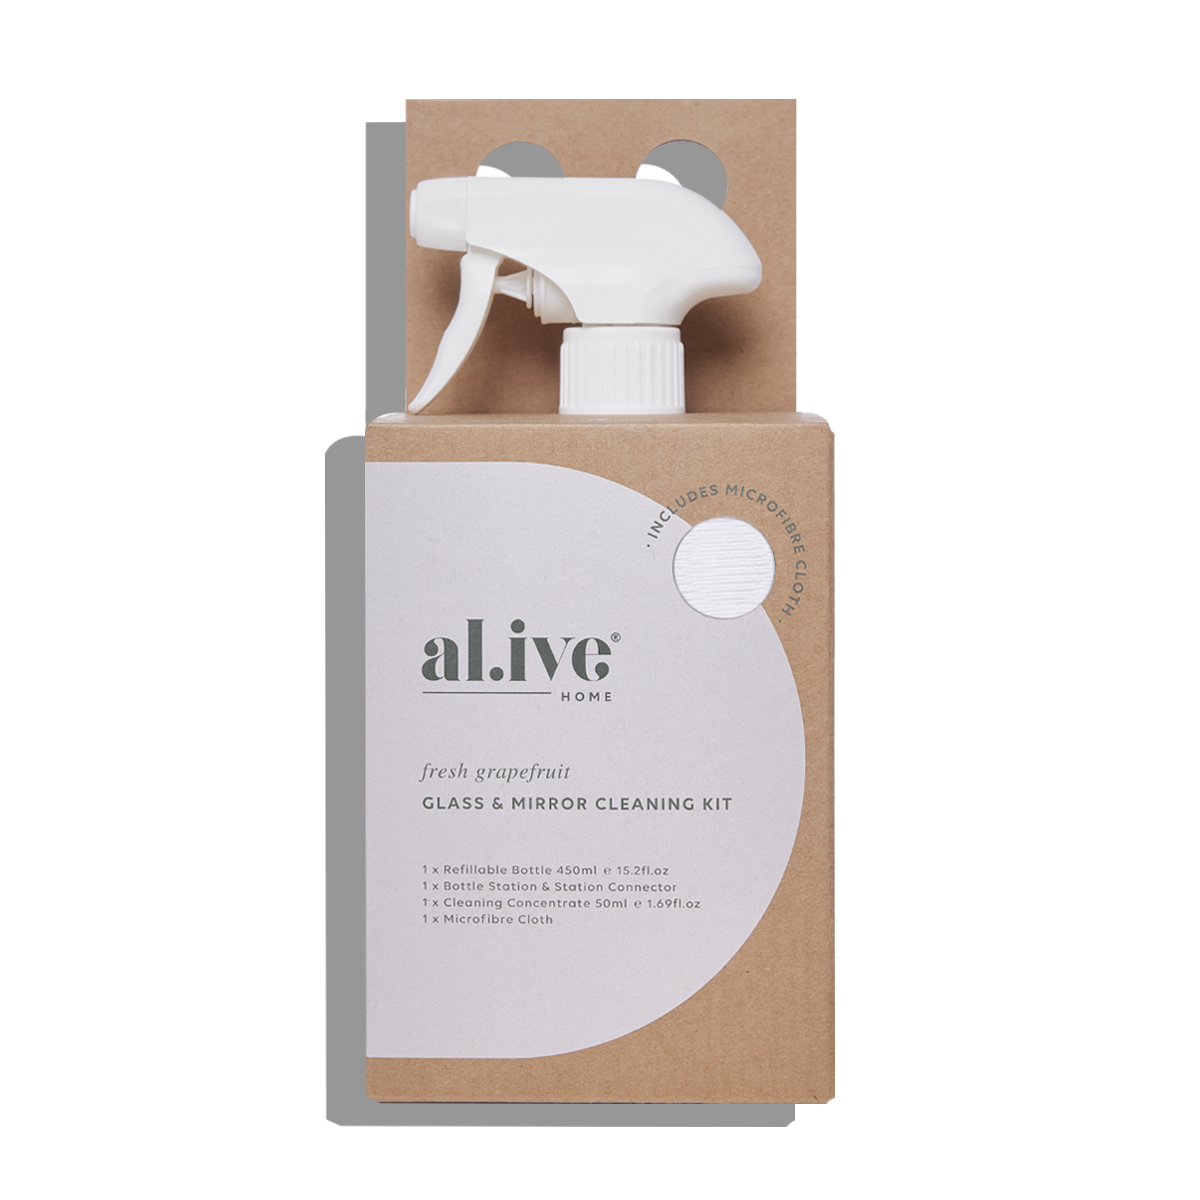 ALIVE BODY GLASS & MIRROR CLEANING KIT